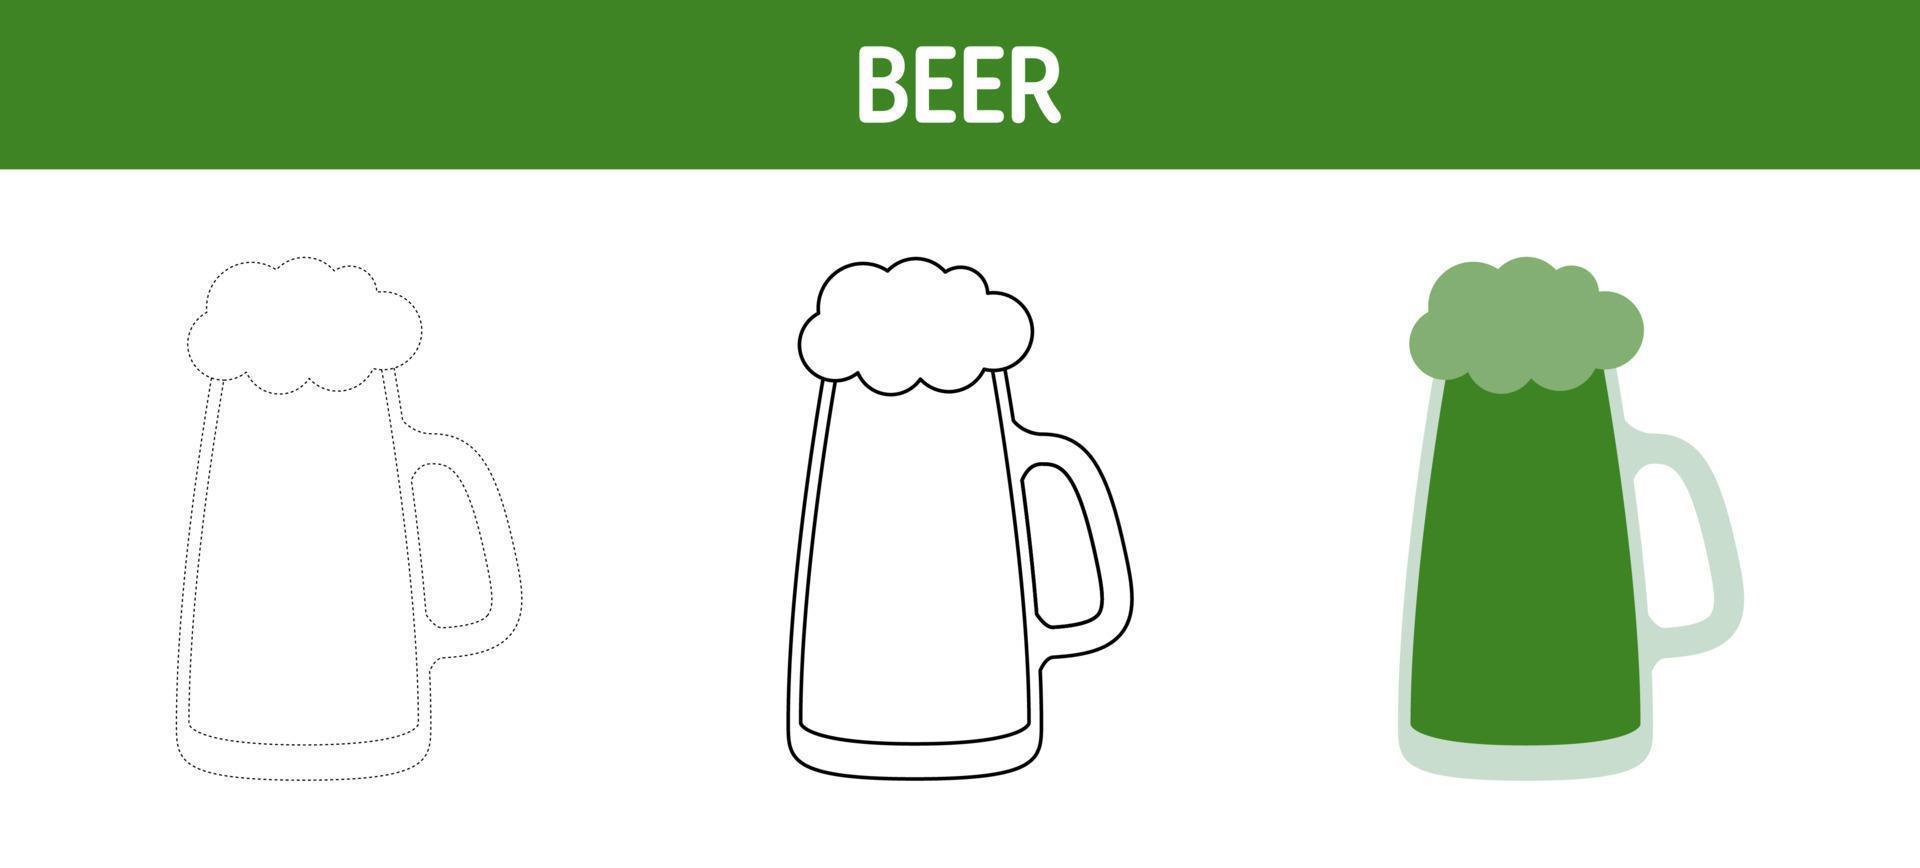 Beer tracing and coloring worksheet for kids vector